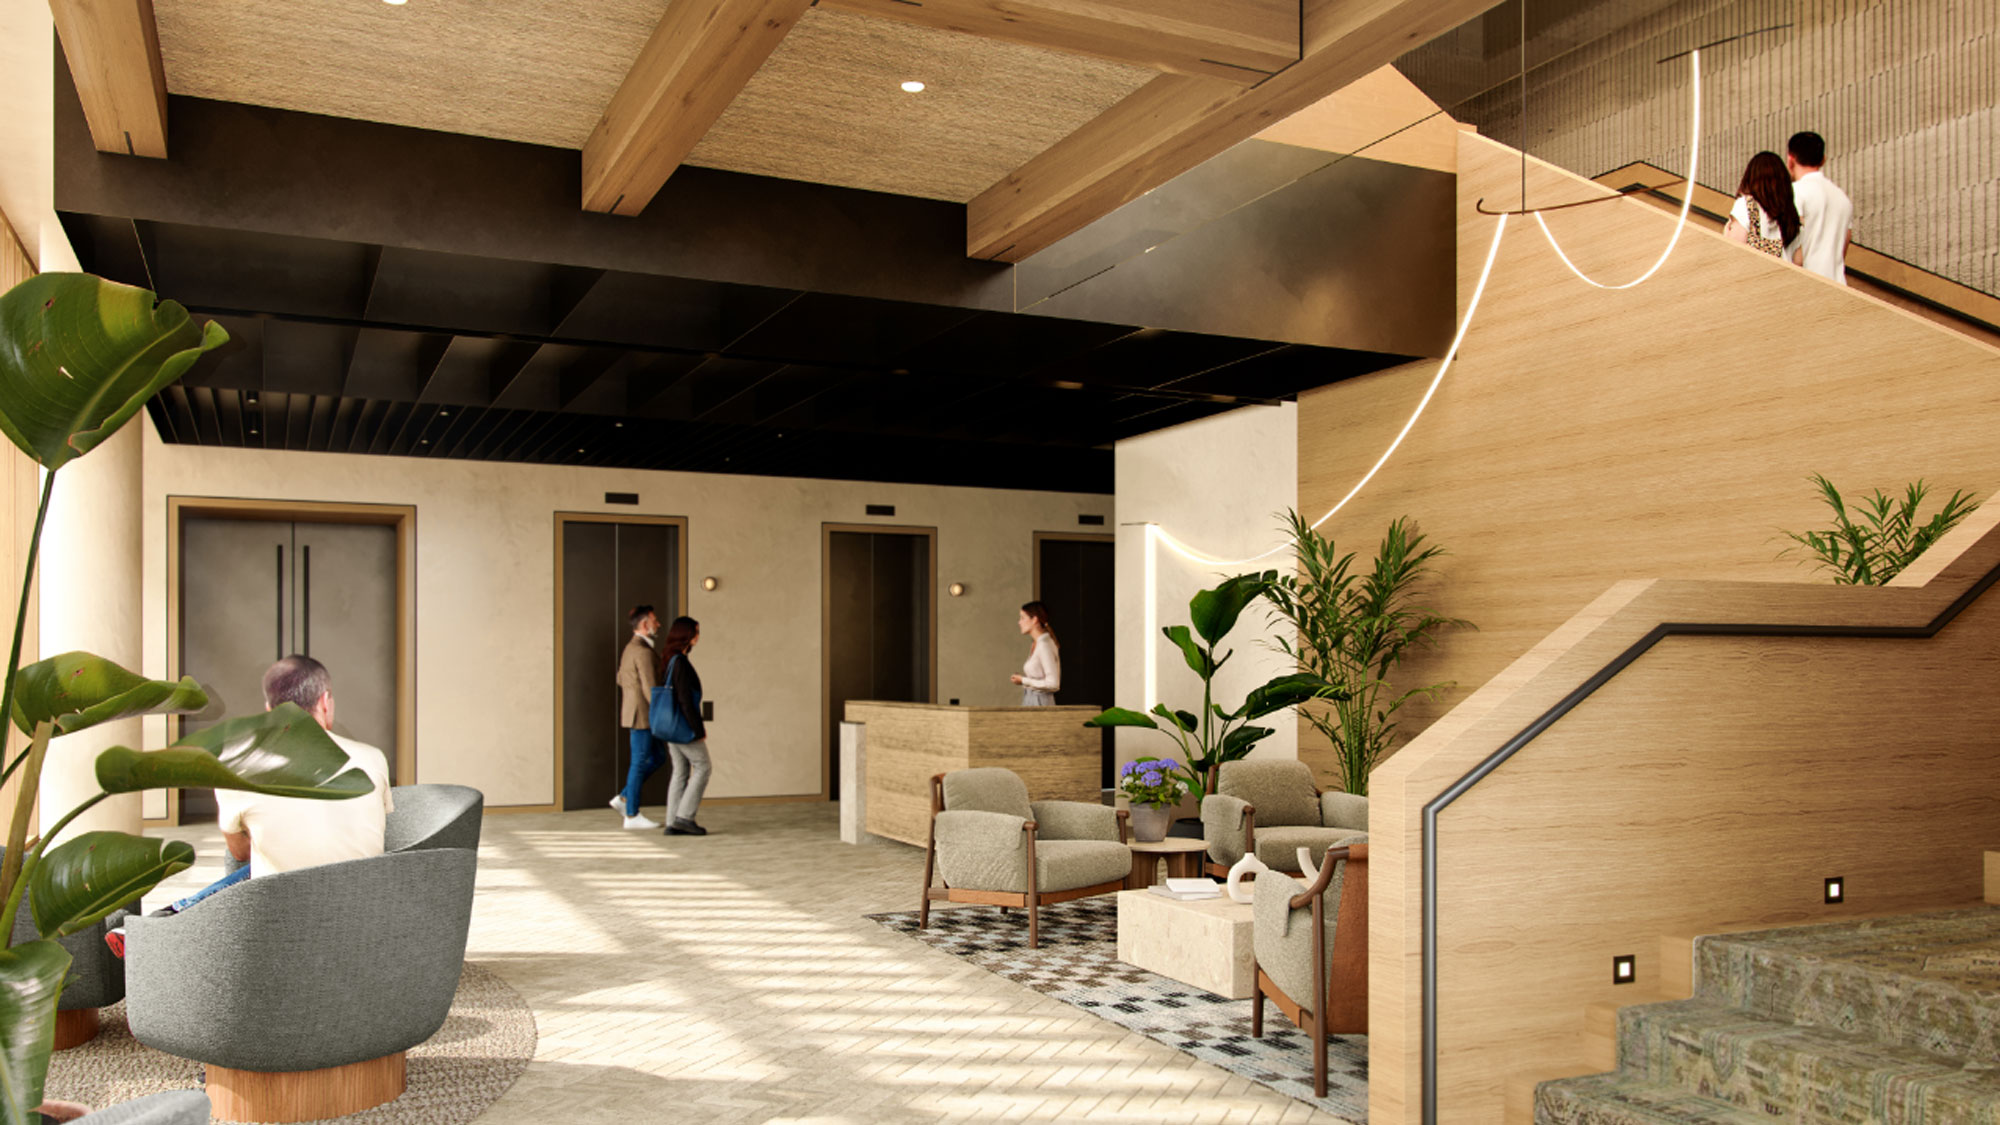 A warm, comforting elevator lobby full of natural wood and light